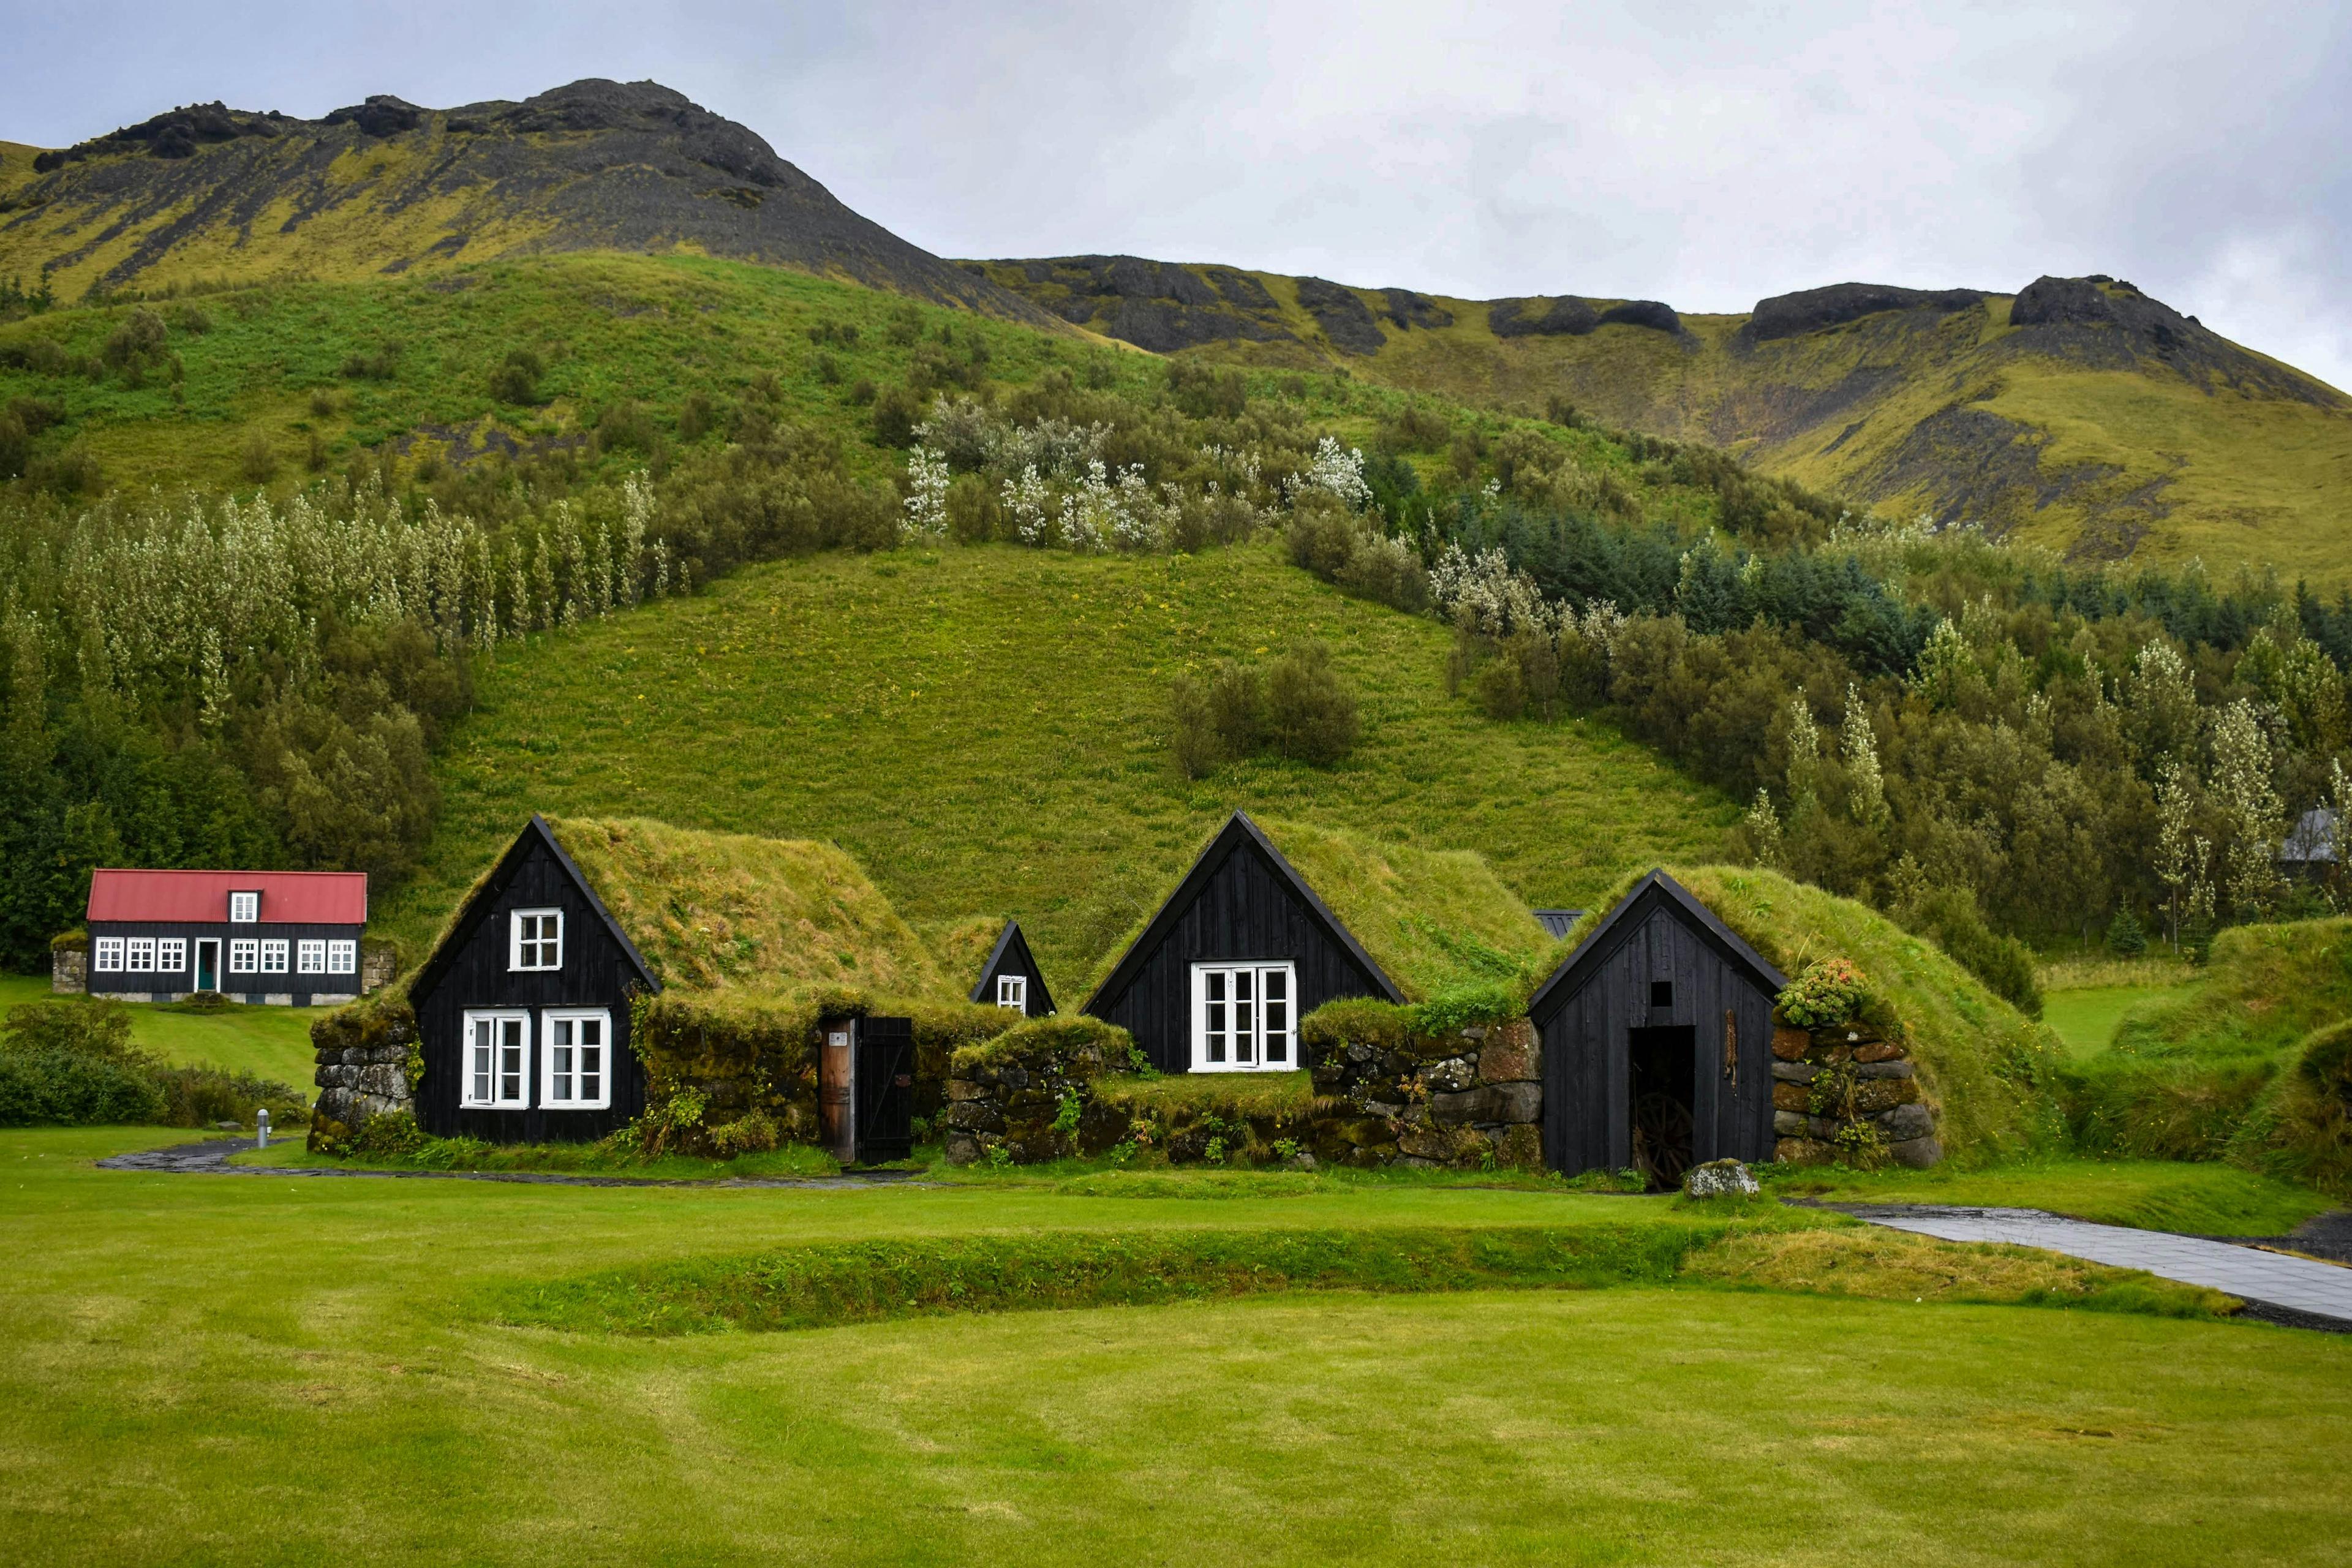 Traditional turf houses with black walls and grass roofs in a lush green setting with rolling hills and a forested area in the background.